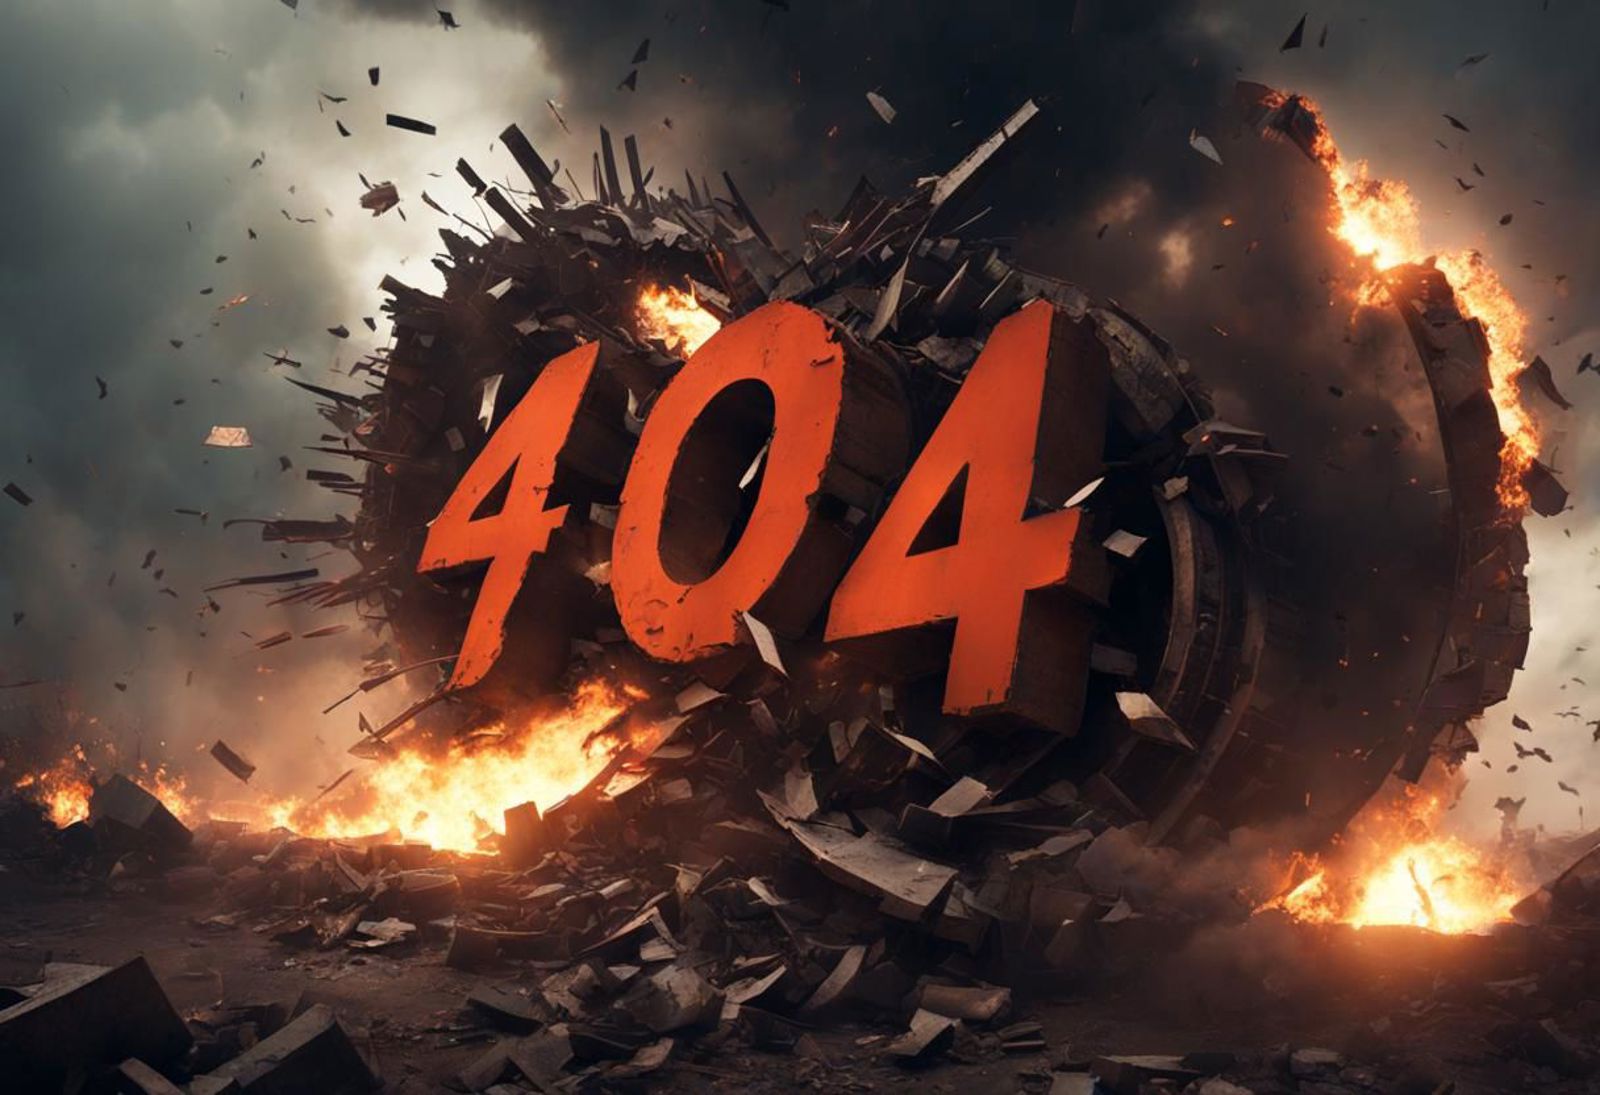 A 3D image of the number 404 in red, surrounded by debris.